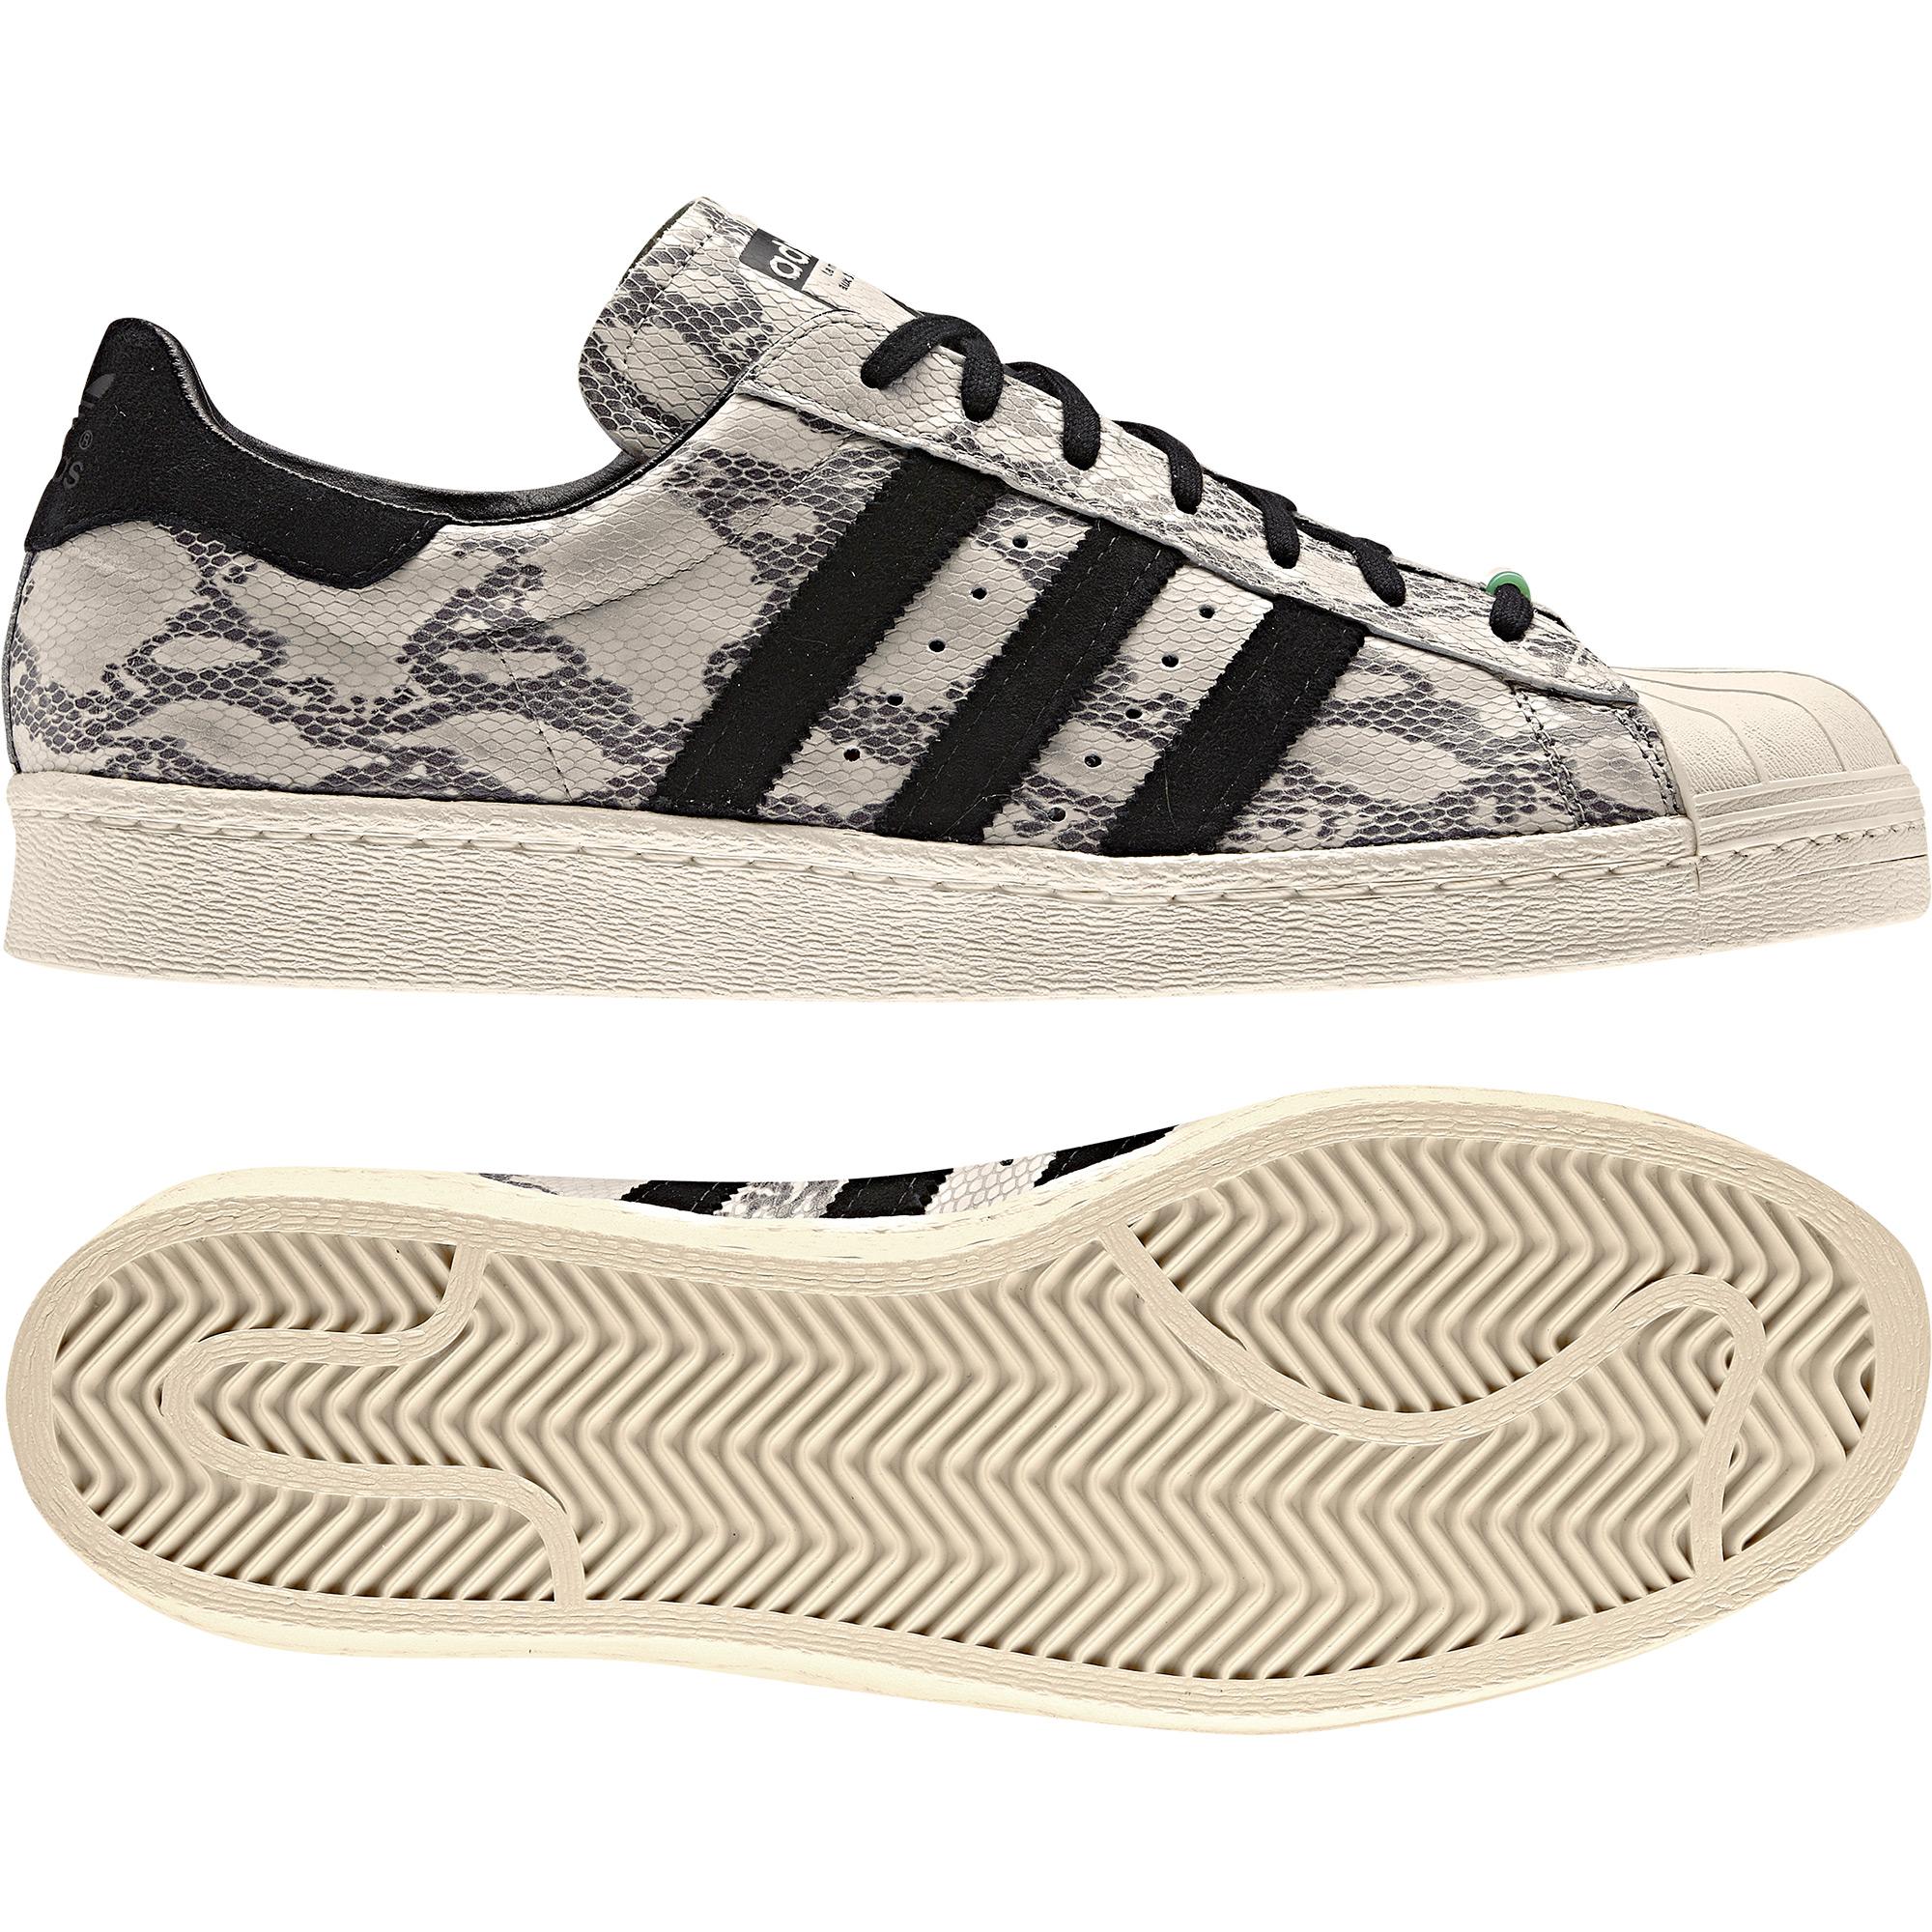 Foto adidas zapatilla Superstar 80s Chinese New Year Hombre foto 217429